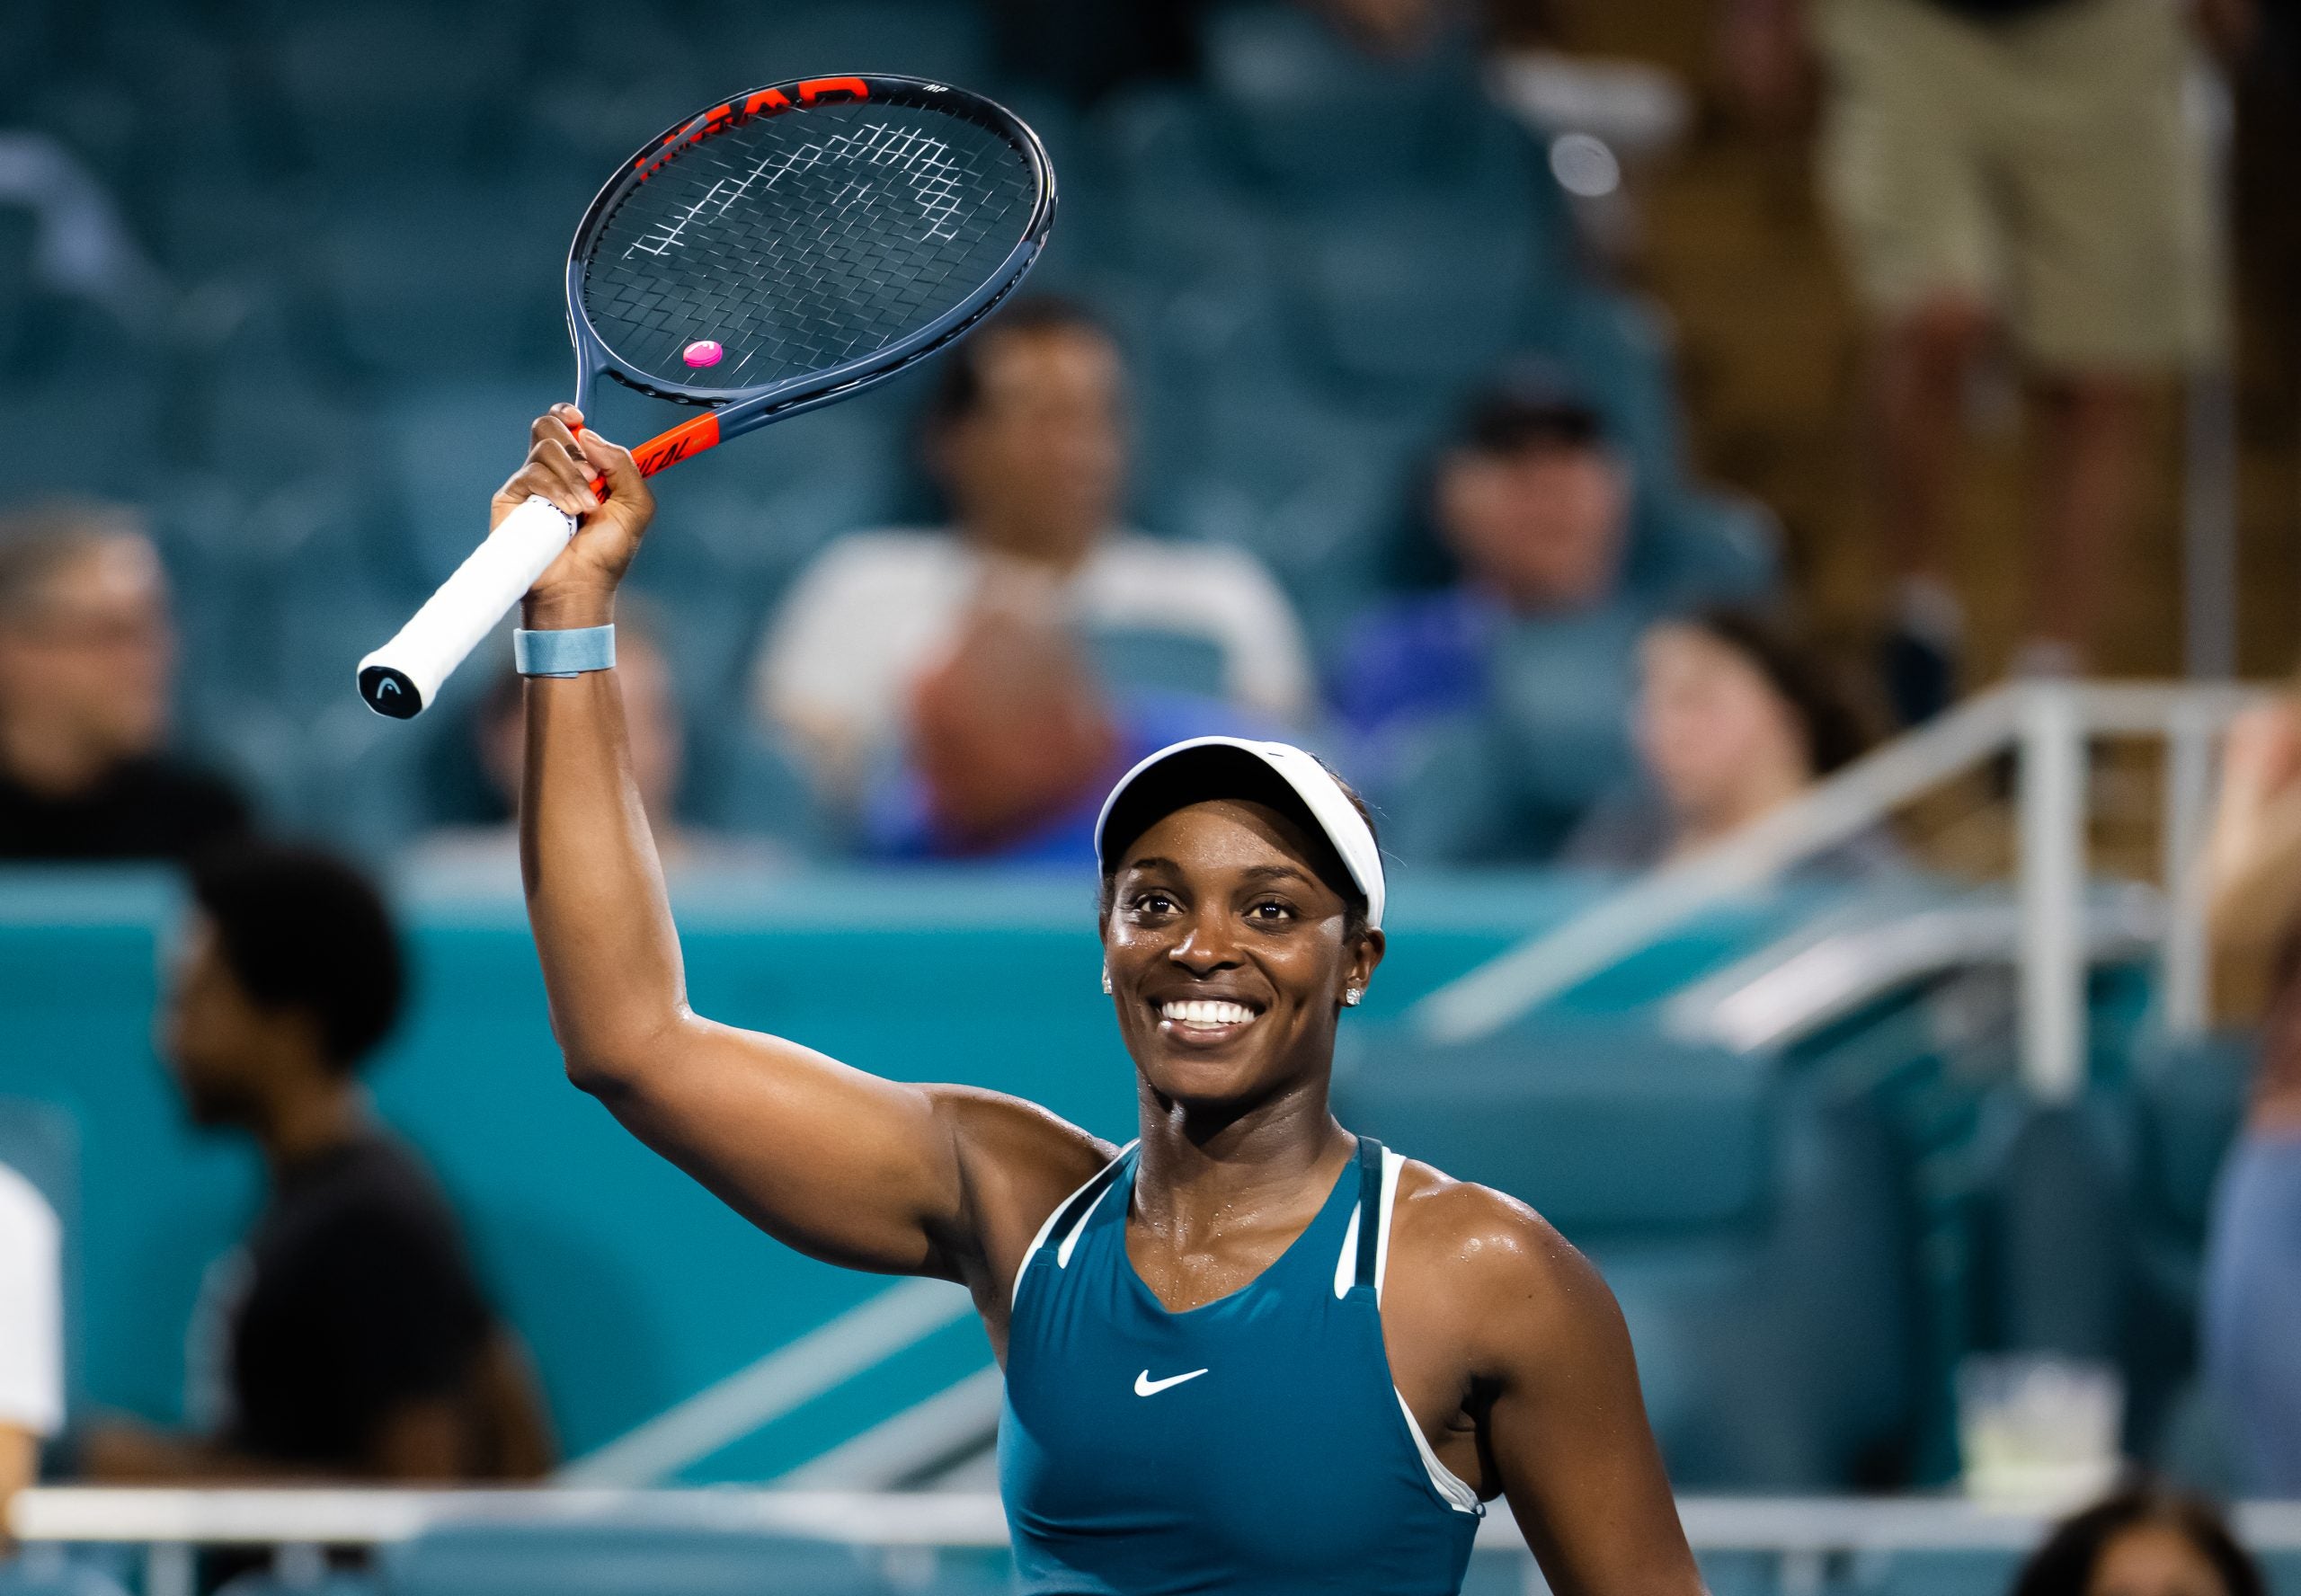 Sloane Stephens On Not Letting Rankings Define Her, How She Prioritizes Time With Her Husband And Self-Care